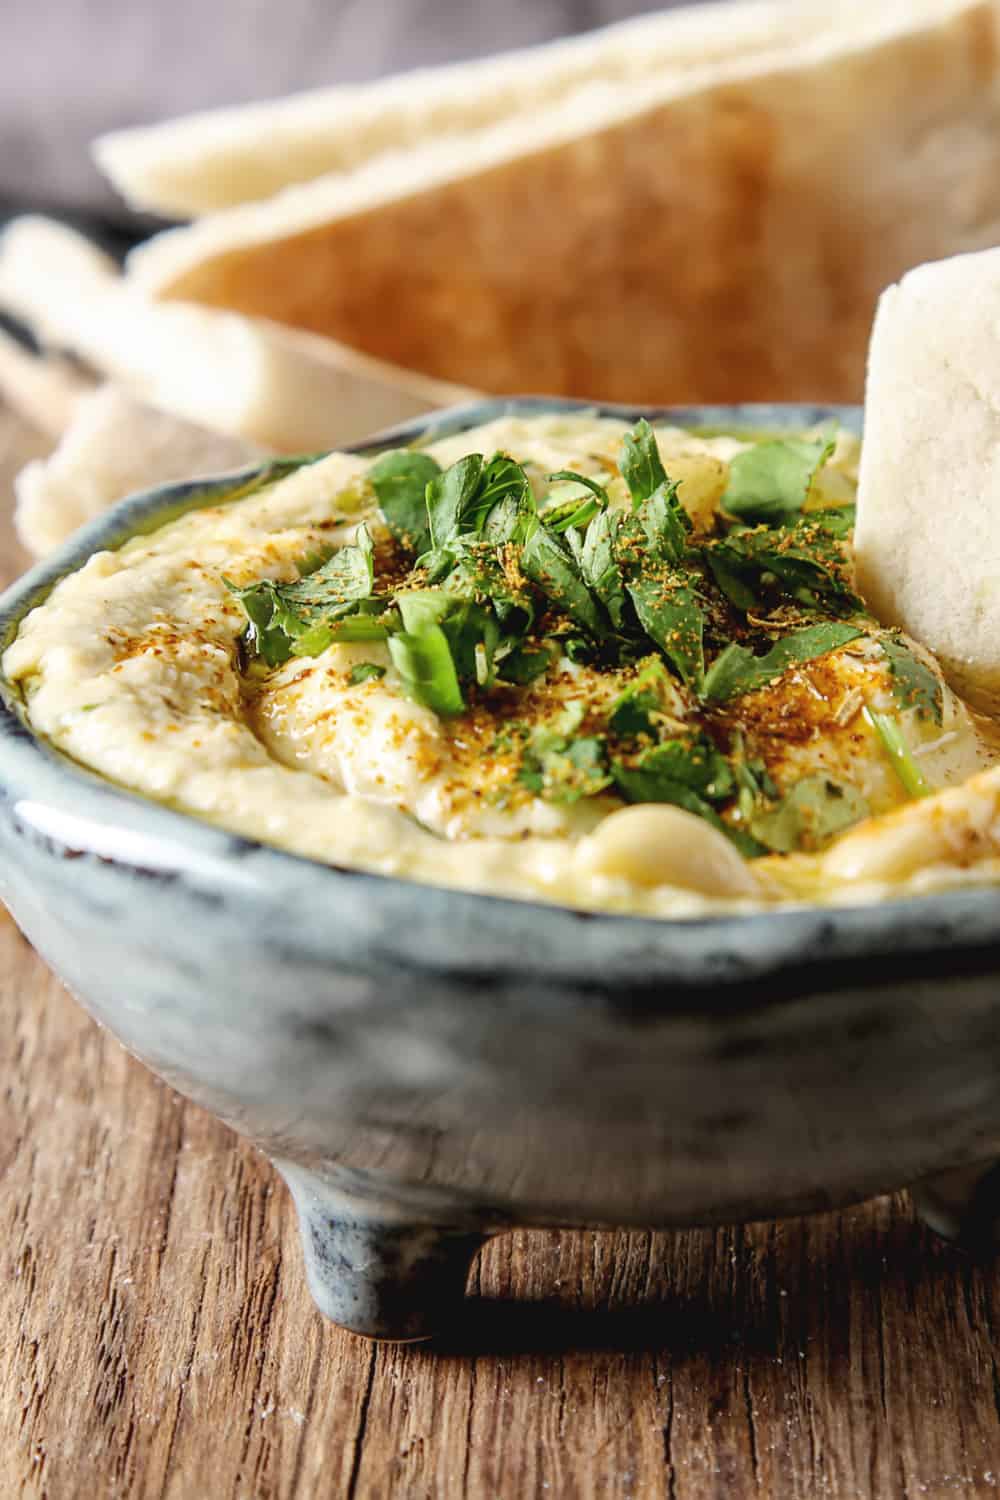 5 Tips to Tell If Hummus Has Gone Bad